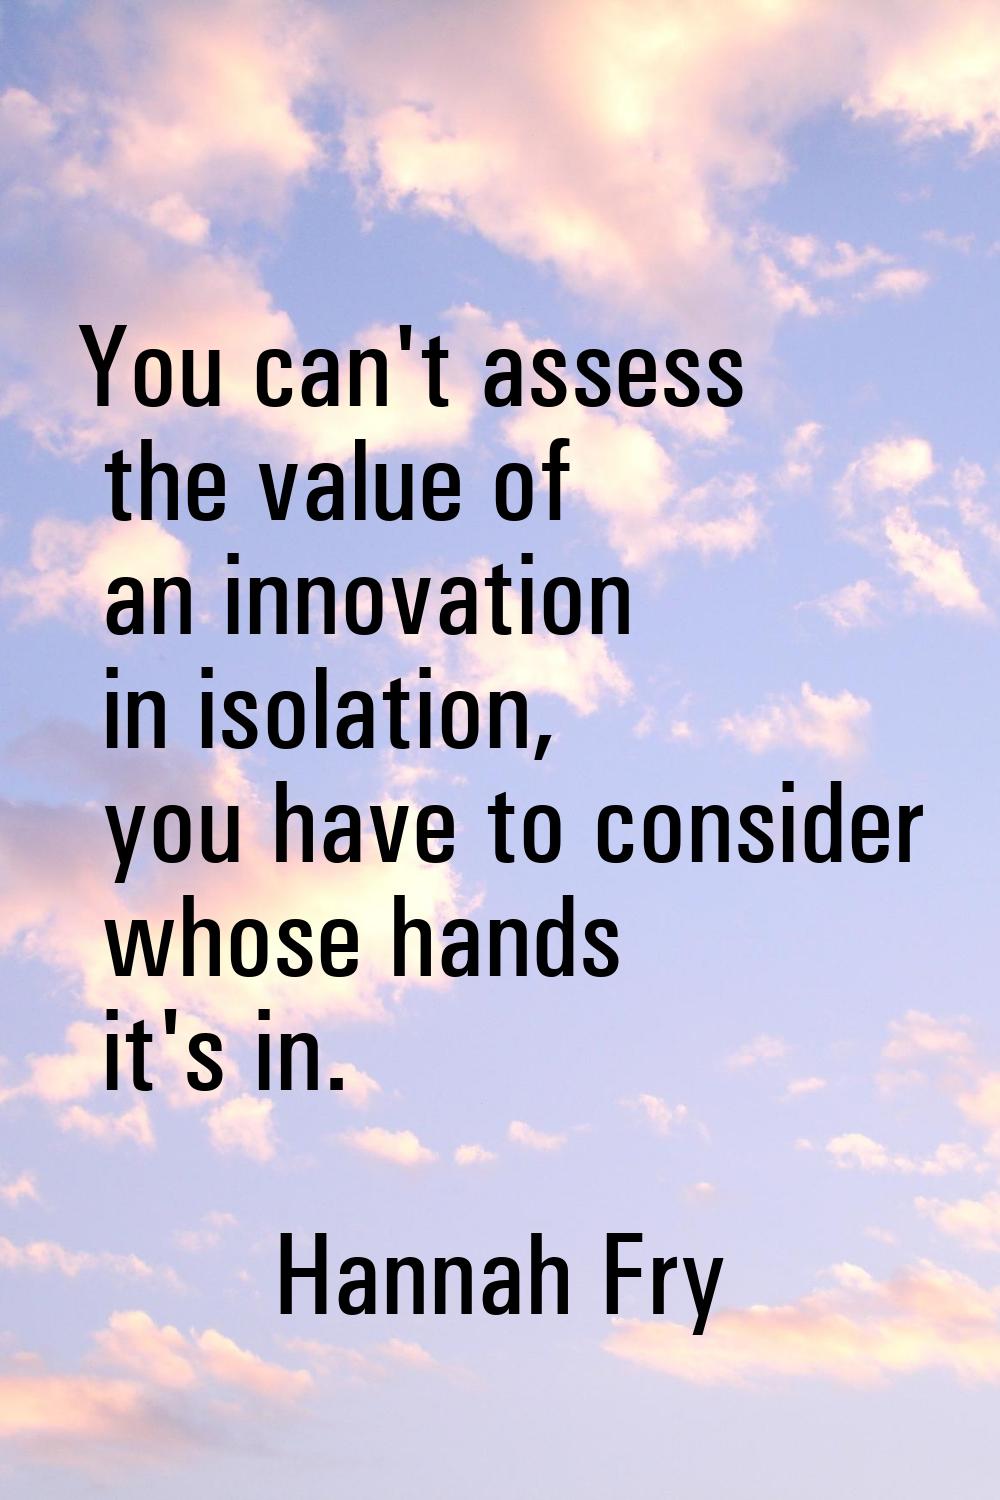 You can't assess the value of an innovation in isolation, you have to consider whose hands it's in.